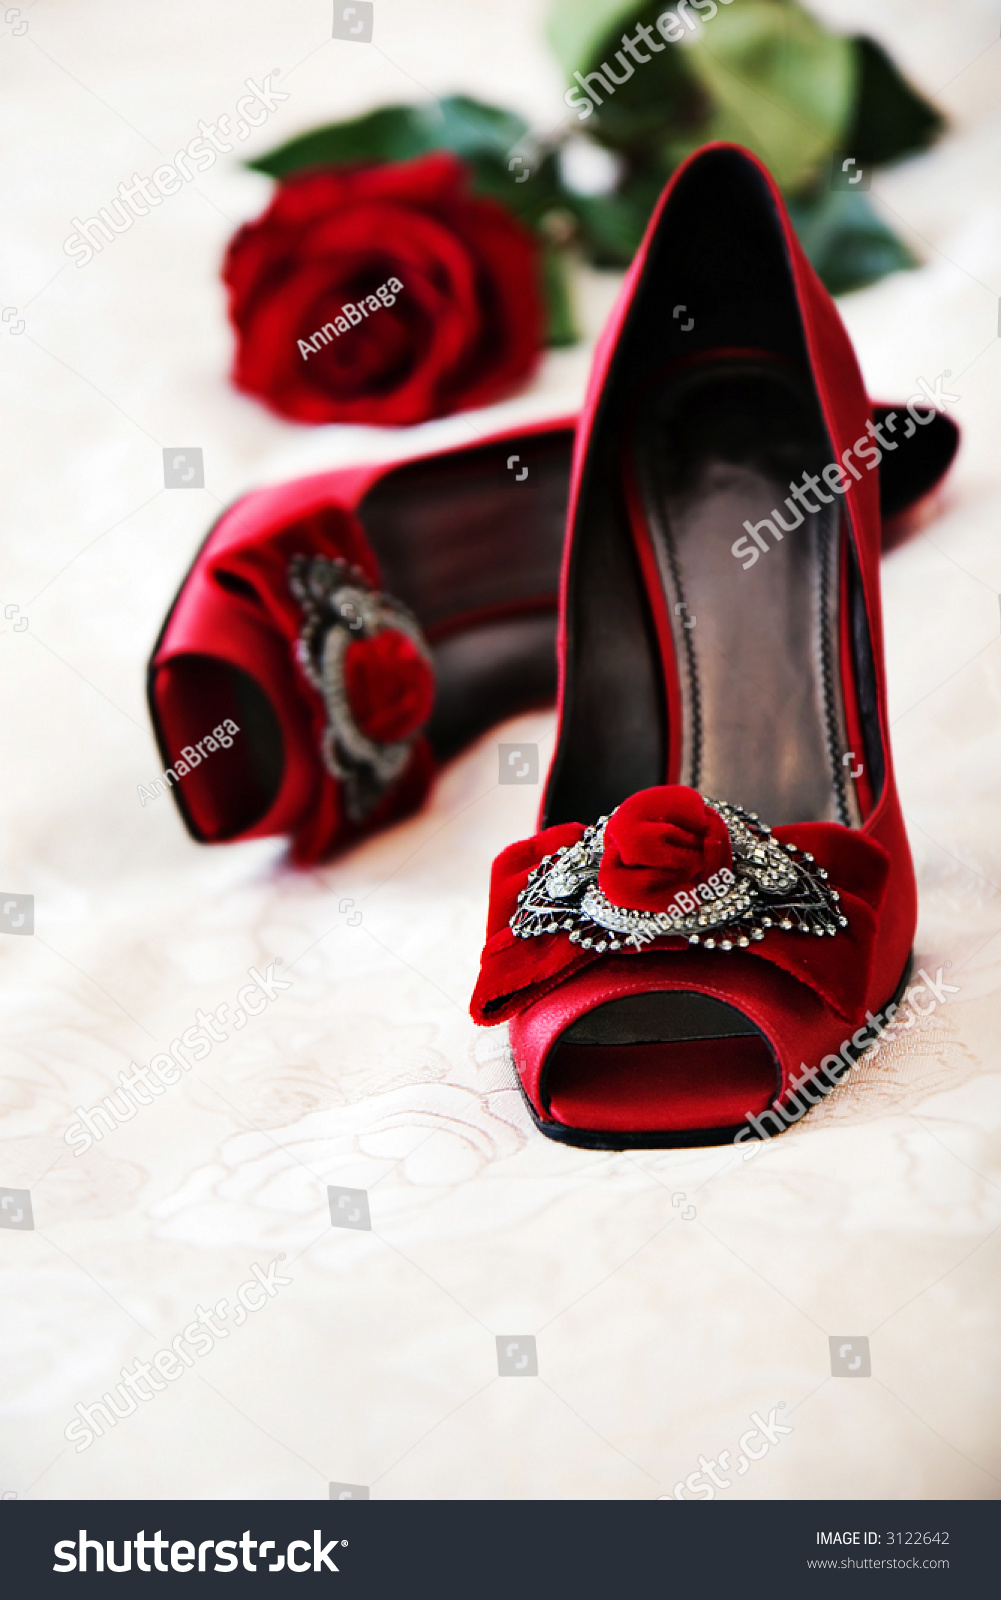 High Heels Shoe And Red Rose Stock Photo 3122642 : Shutterstock